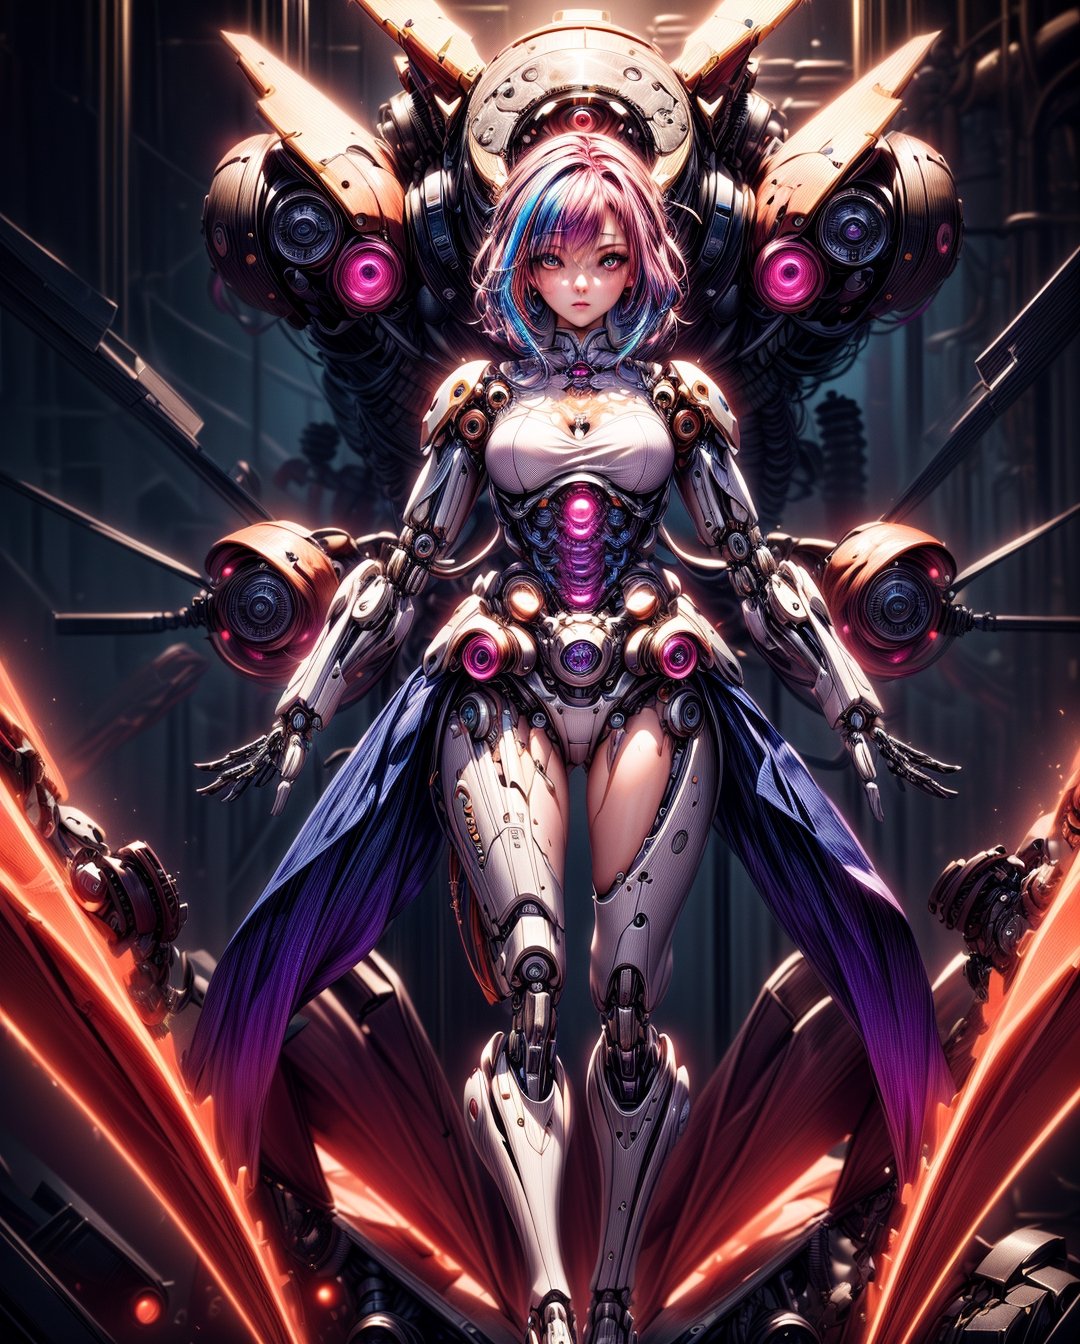 (masterpiece, top quality, best quality, official art, beautiful and aesthetic:1.2),(1girl:1.4),full body,([pink|blue|cpurple|orange] hair:1.5),extreme detailed,(fractal art:1.3),(colorful:1.5),highest detailed,(Mechanical modification:1.5),dynamic poses, [machines|gears] background,eyes shoot,more detail XL,robotic body,Add more detail